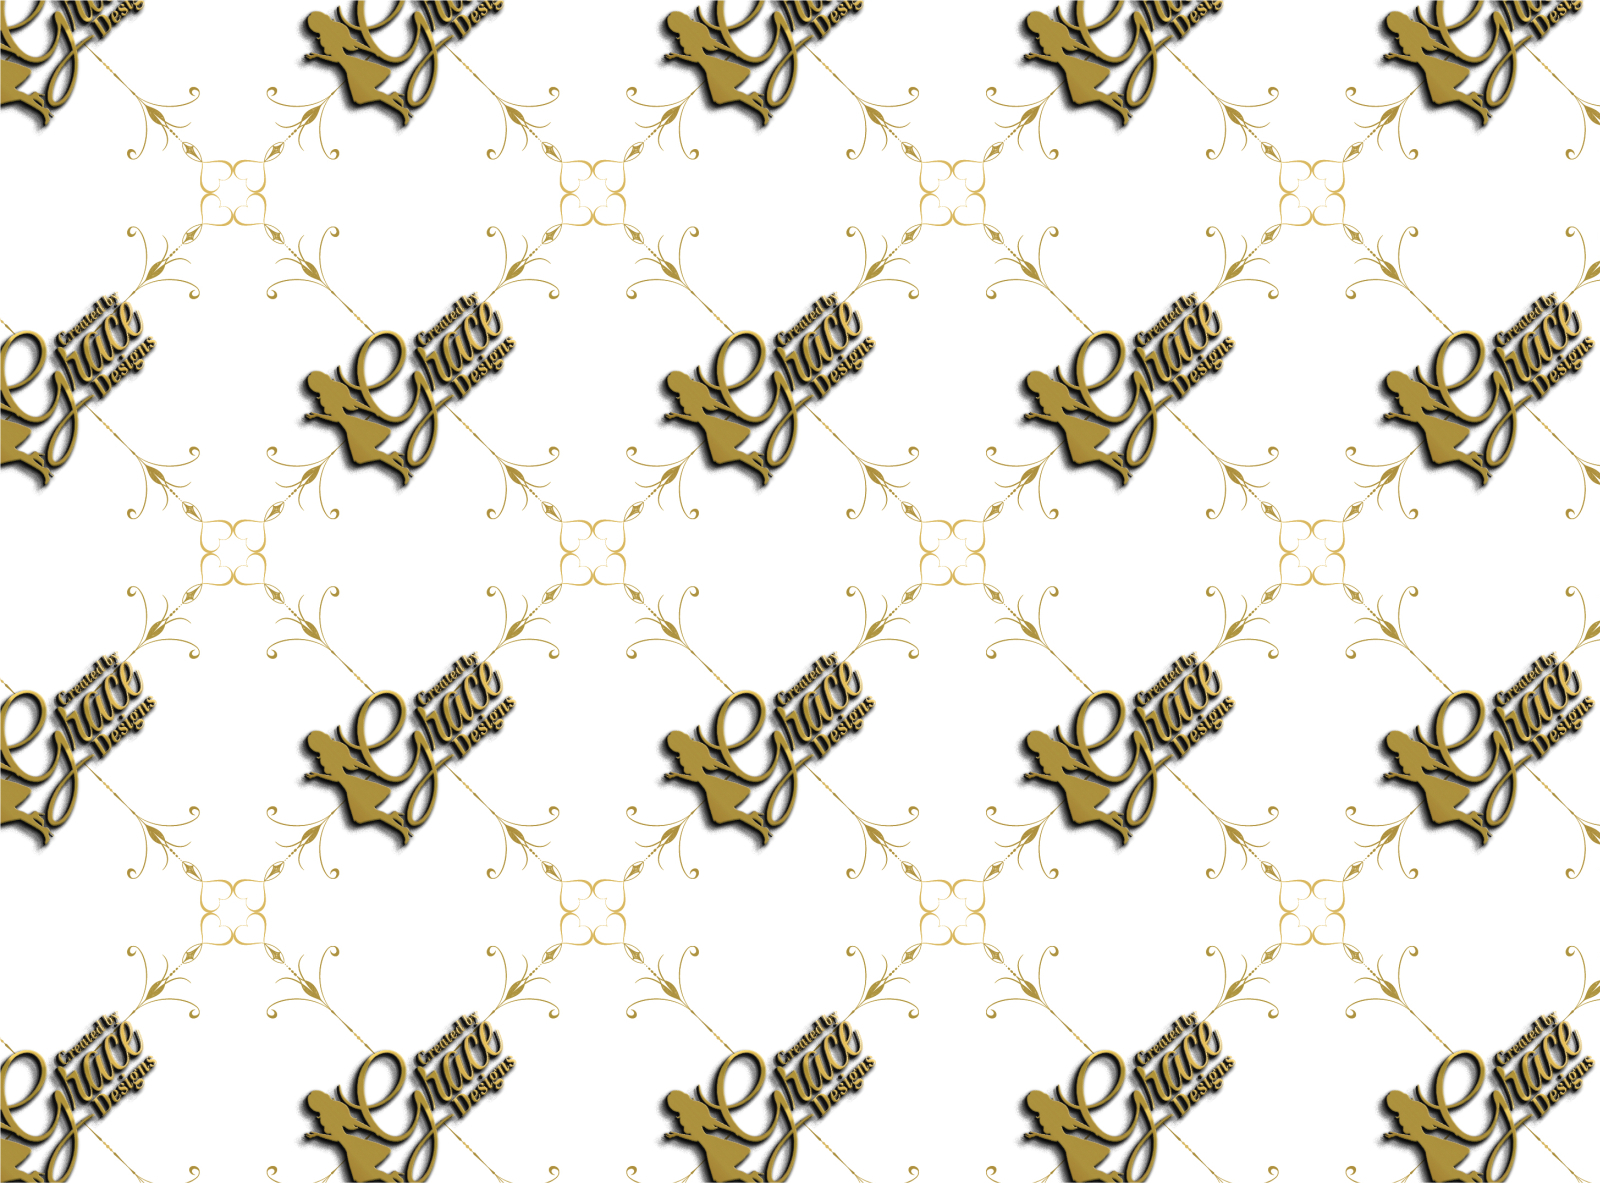 Pattern Design by Invention Technologies on Dribbble